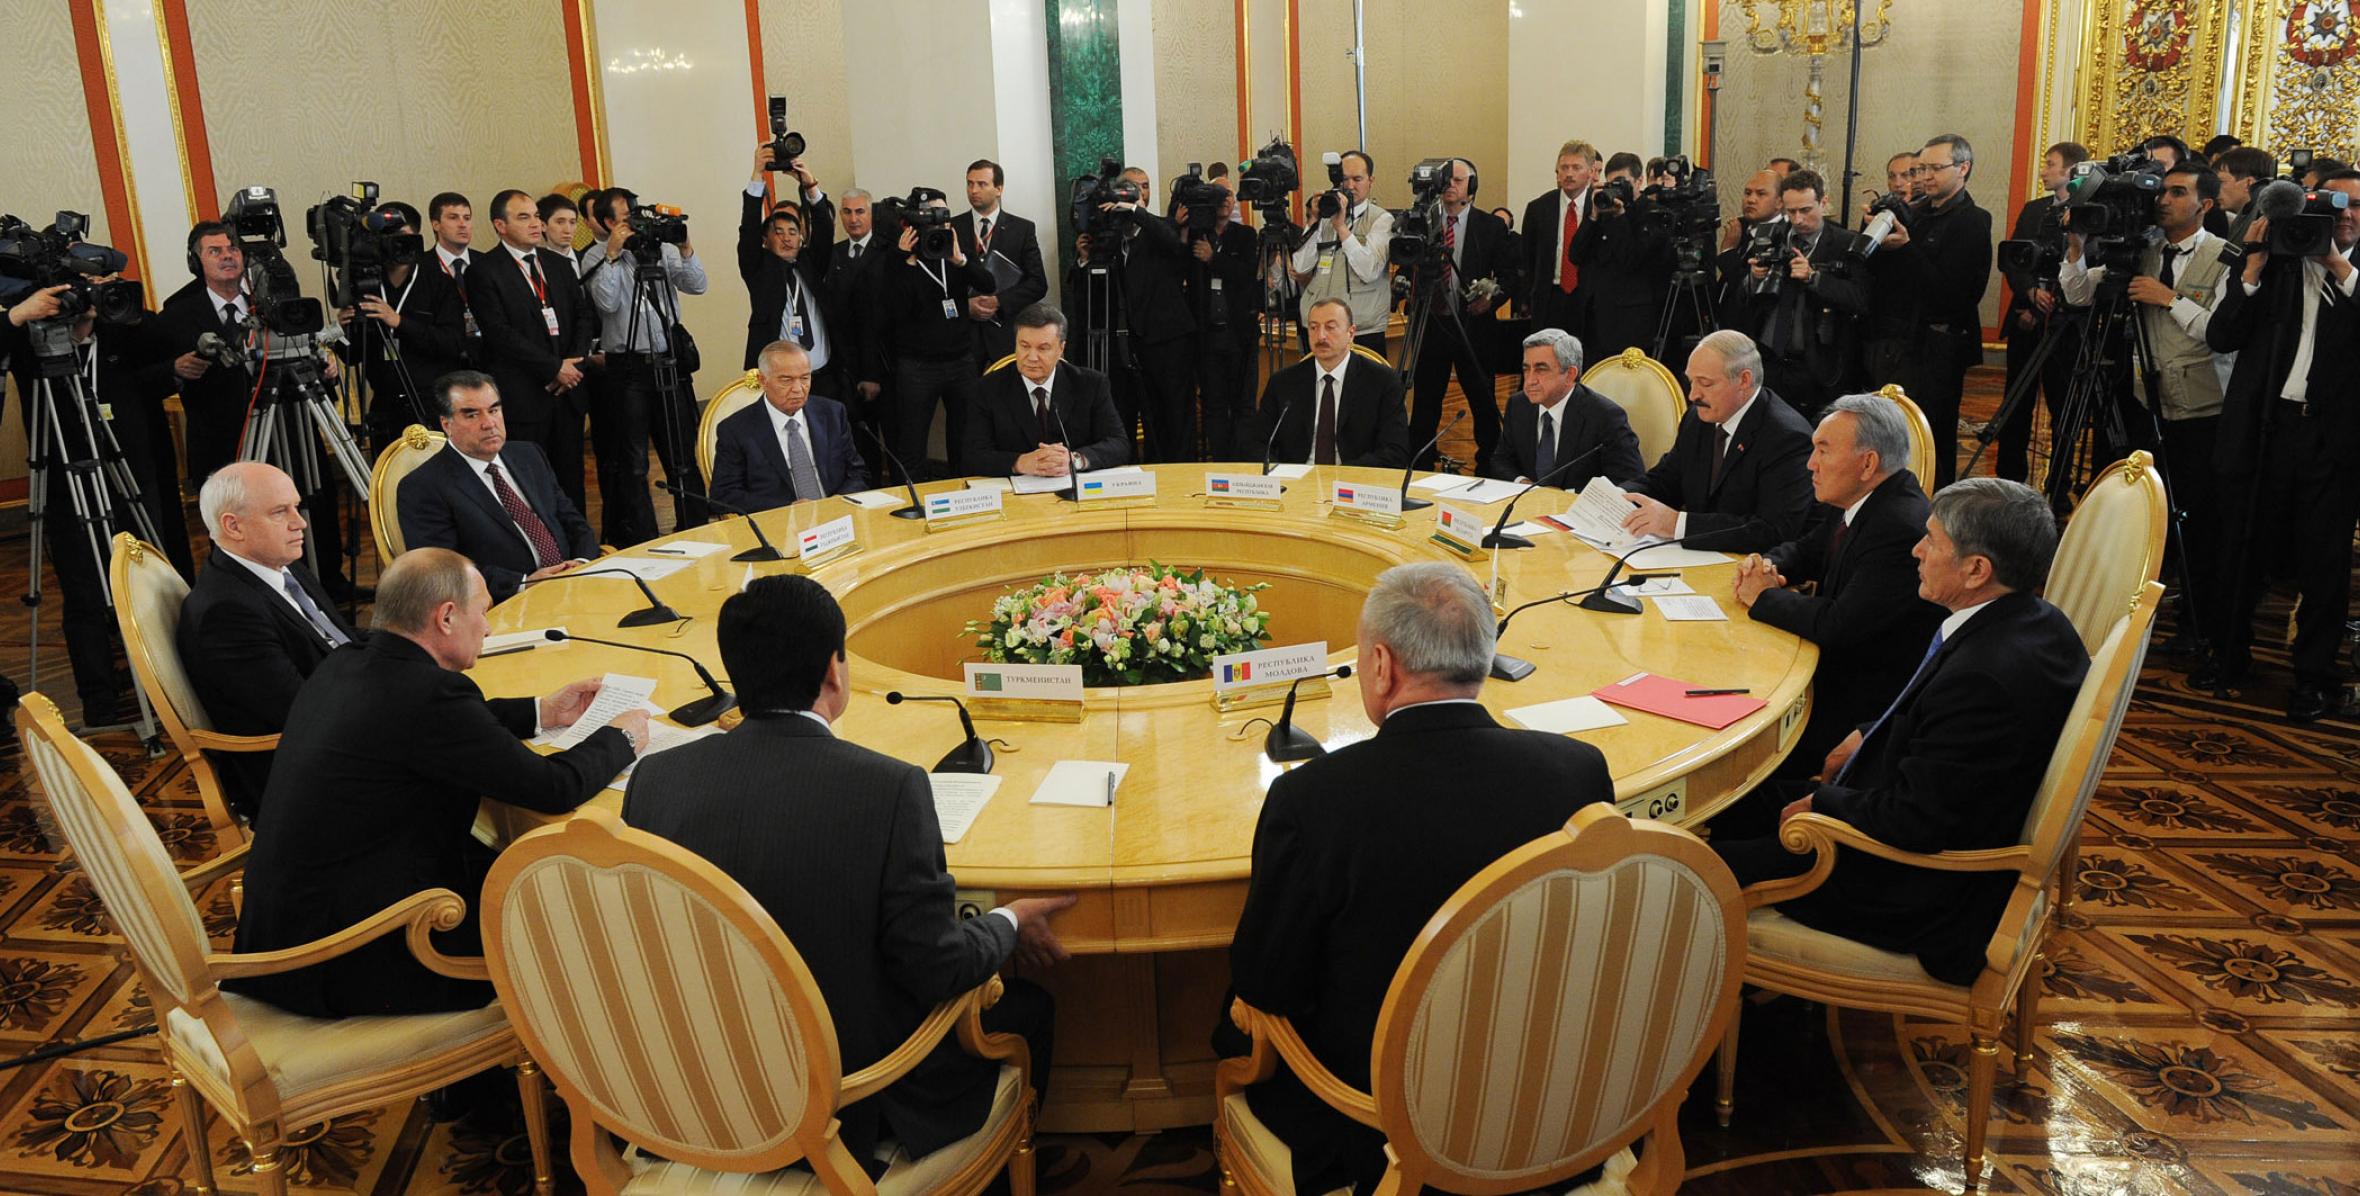 Ilham Aliyev attended an unofficial meeting of the CIS Council of Heads of State